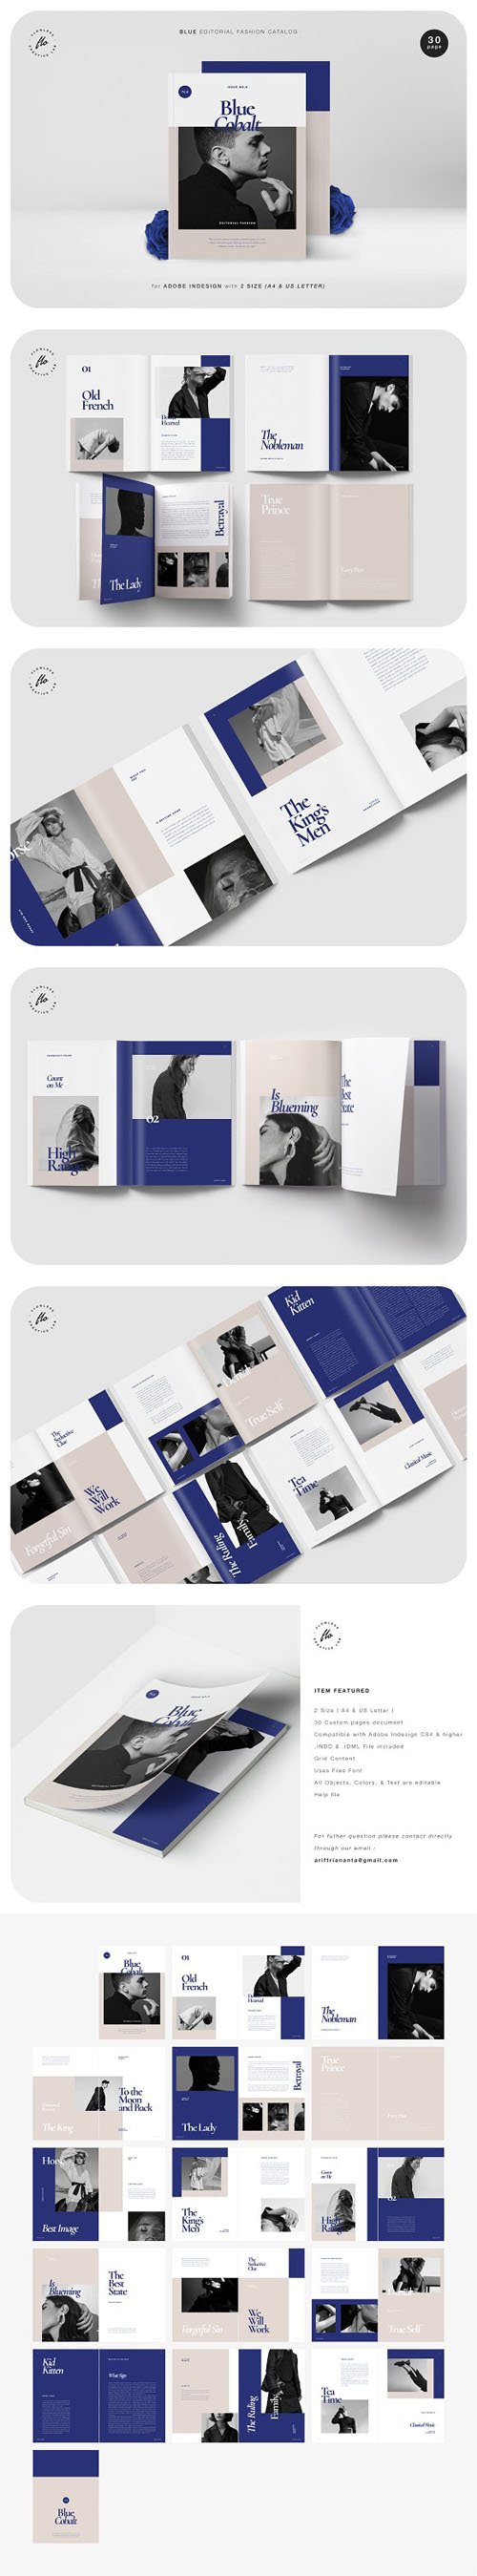 Blue Editorial Fashion Catalog Indesign INDD Templates